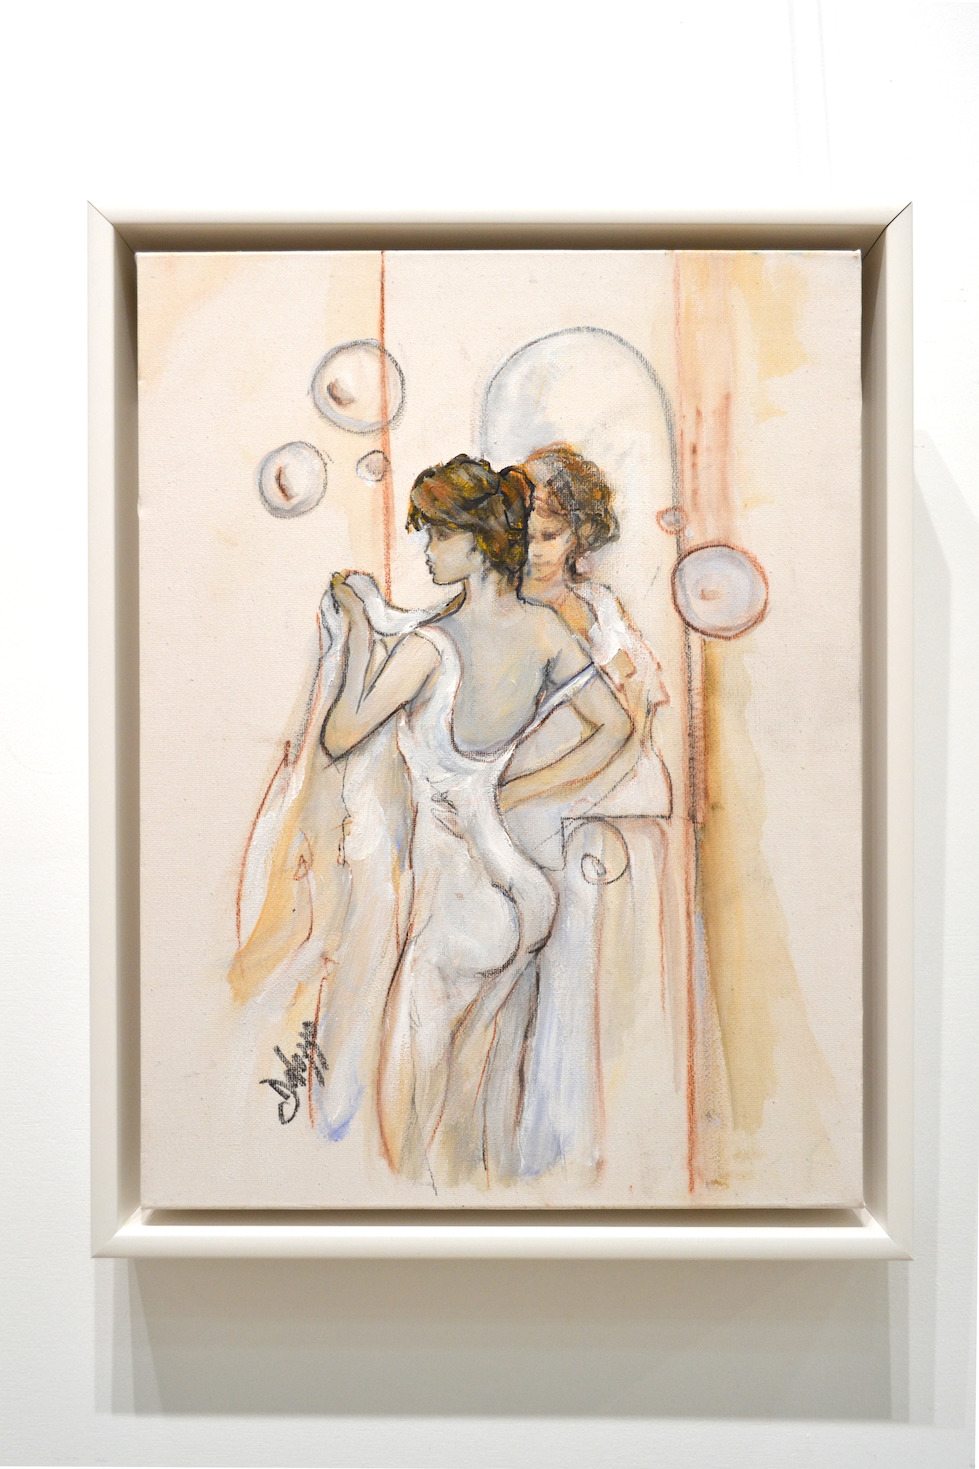 Framed Front View Of Nude Painting "Date Night" By Lucette Dalozzo